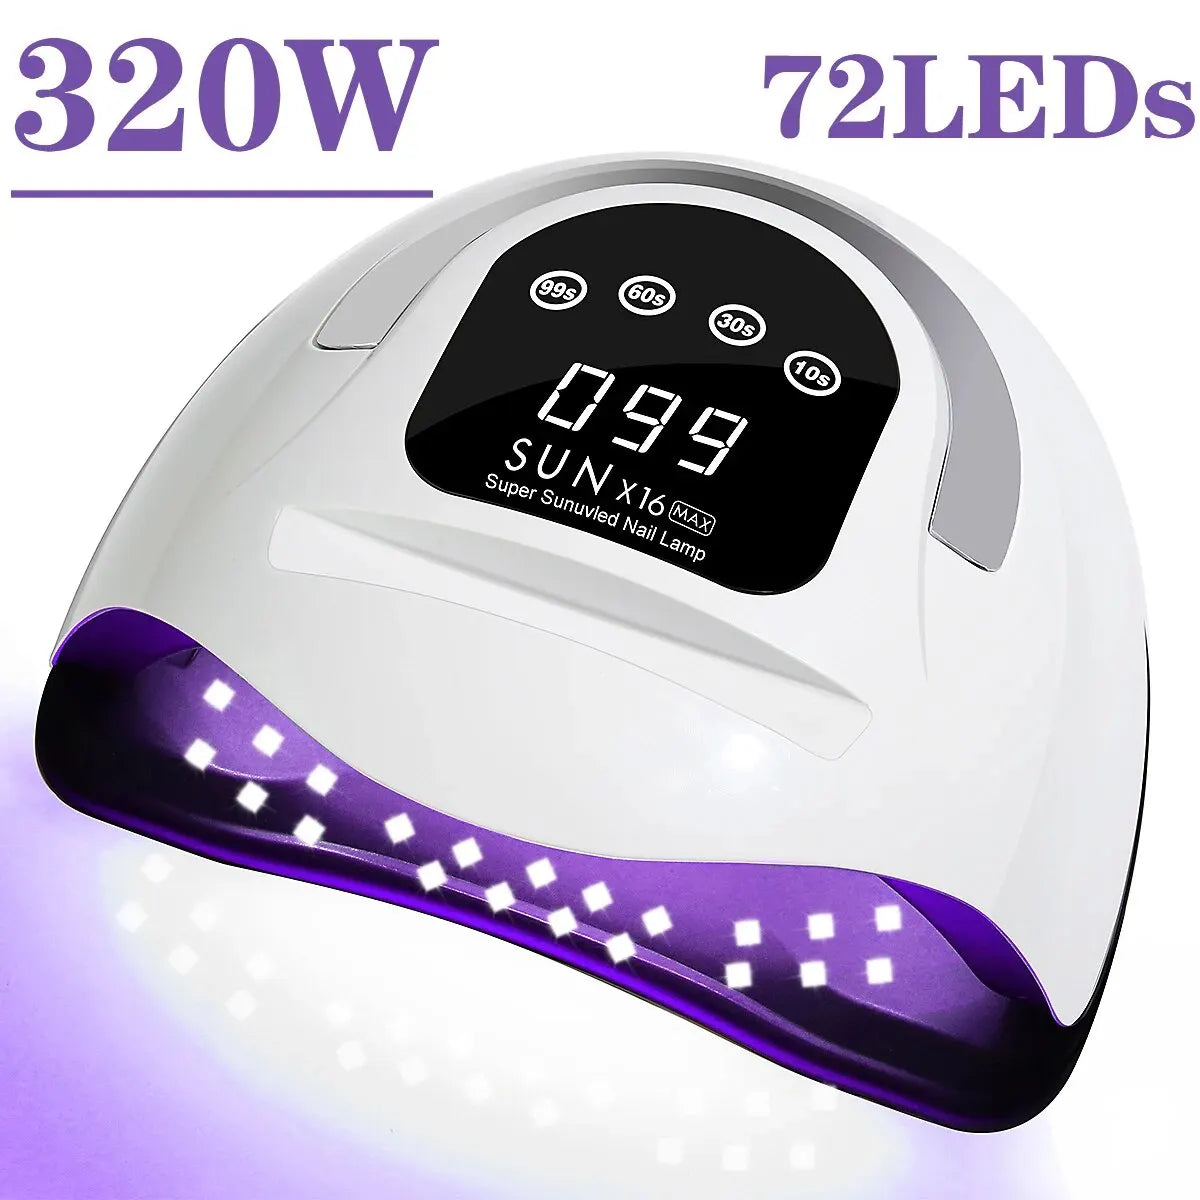 Upgrade Big Power 320W 72LEDs UV LED Lamp for Nails With Four Timer Memory Function Lamp for Gel Polish Drying Lamp for Manicure